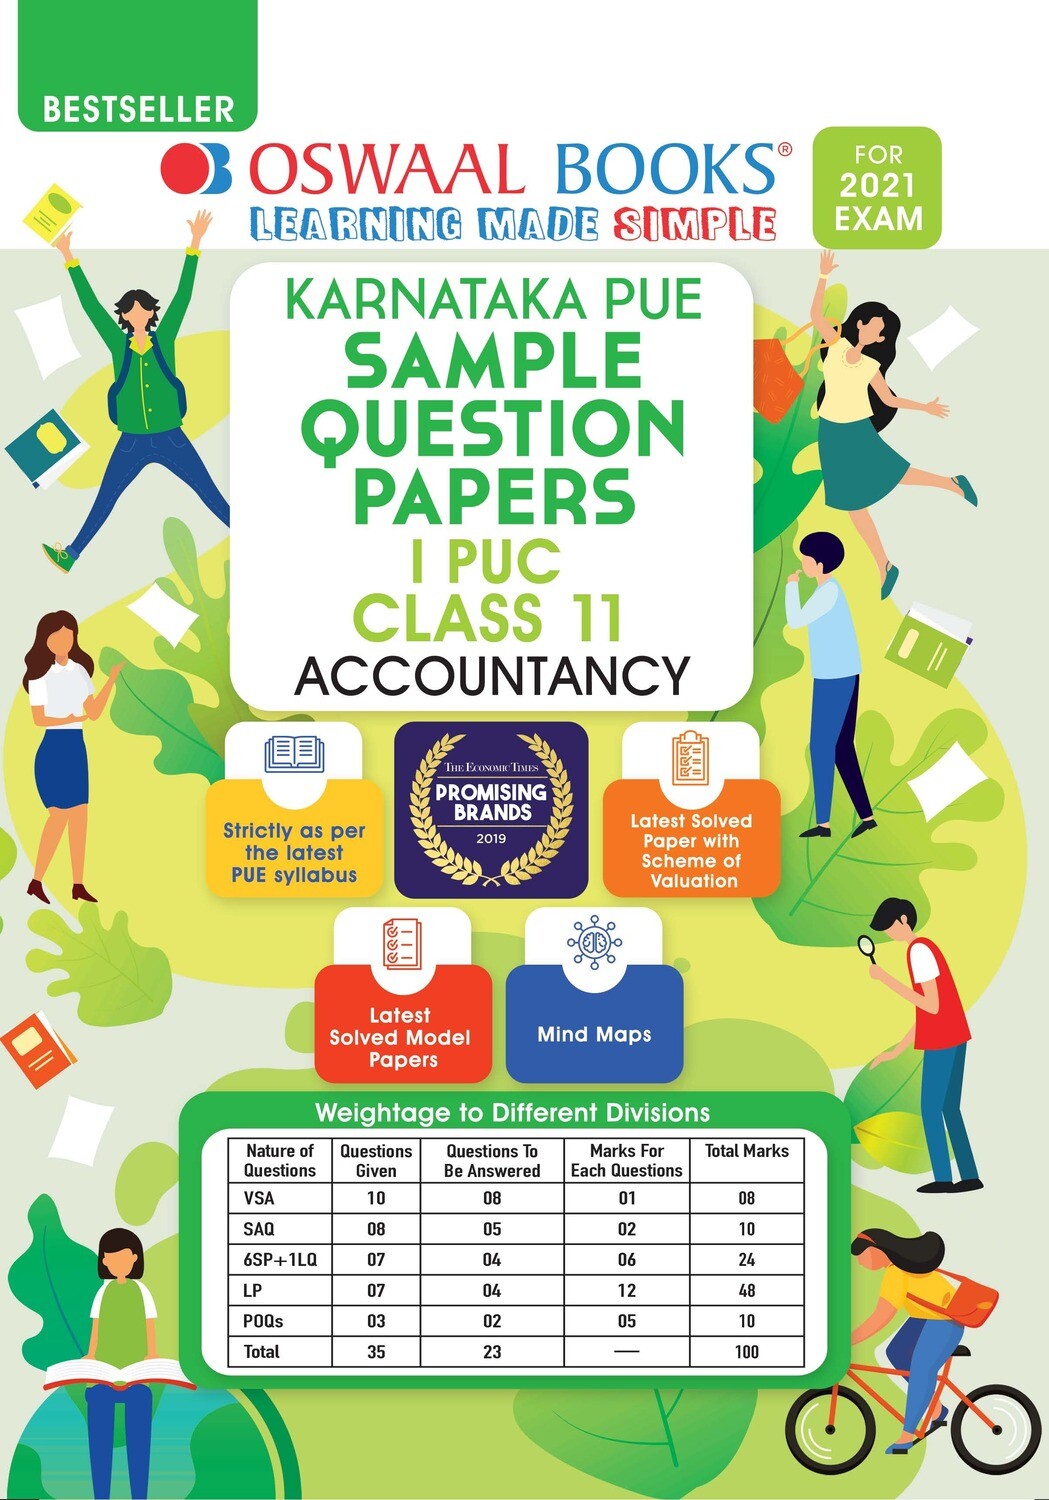 Buy e-book: Oswaal Karnataka PUE Sample Question Papers I PUC Class 11 Accountancy (For 2021 Exam)